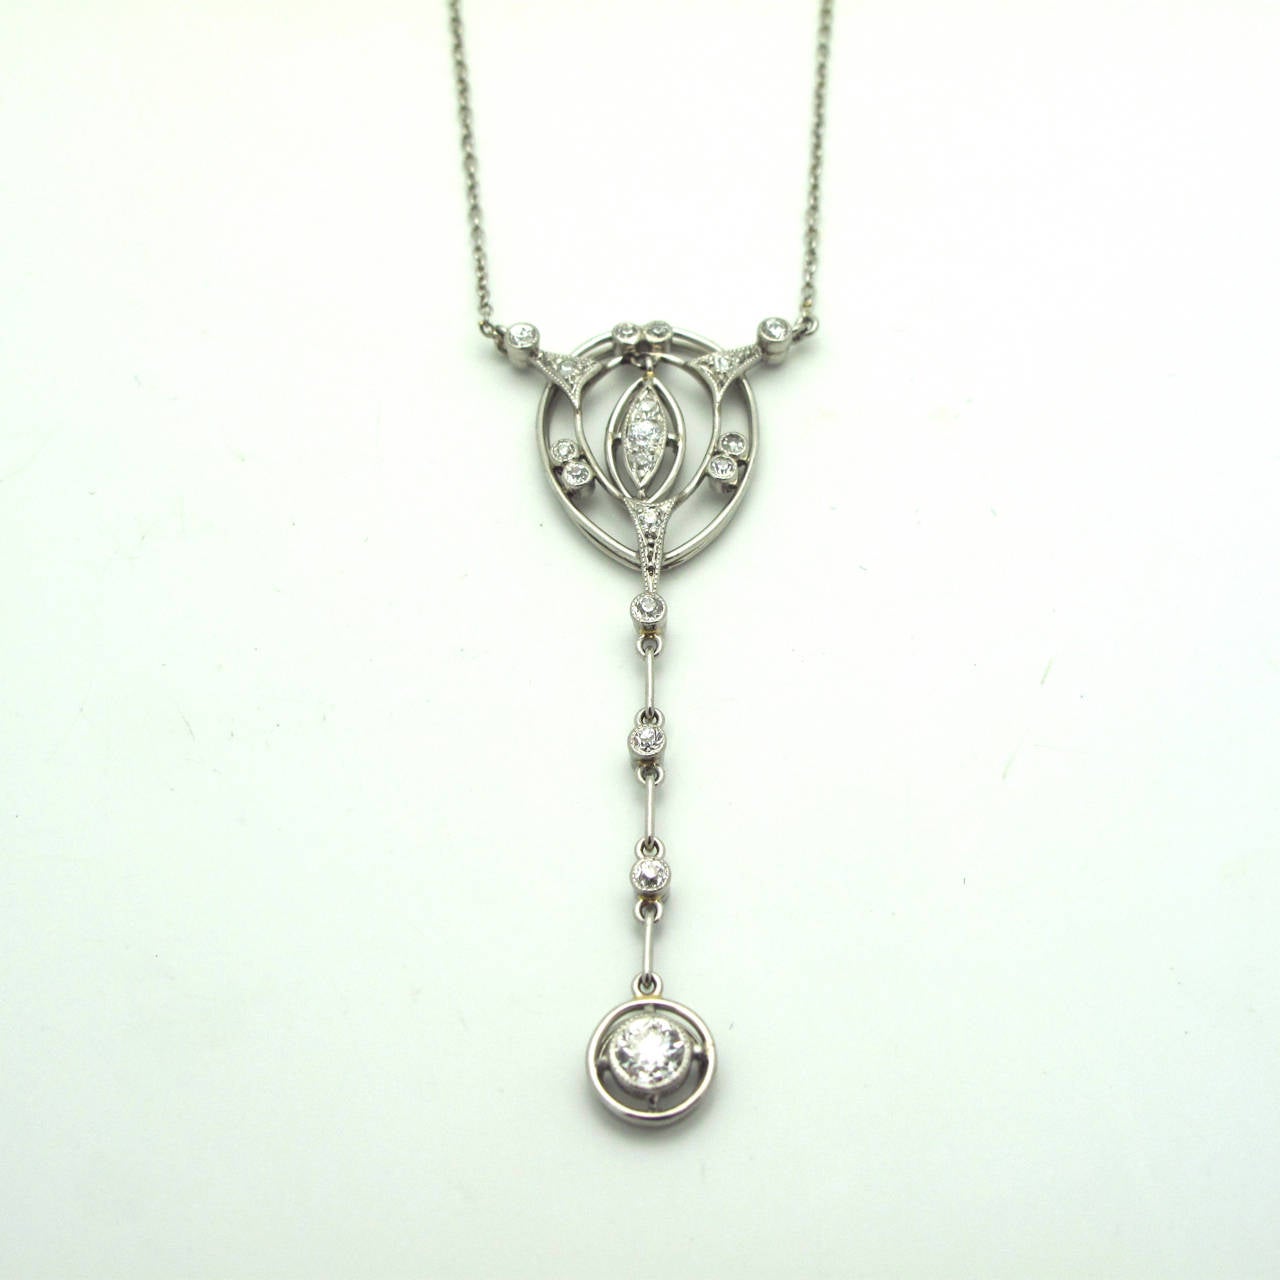 This stunning Art Deco necklace is a wonderful collector's item in that it is beautifully designed with a cascade of diamonds suspended from an inlayed 'orbit'. The diamonds are G/H color and VS2-SI1 quality.This necklace is truly unique.